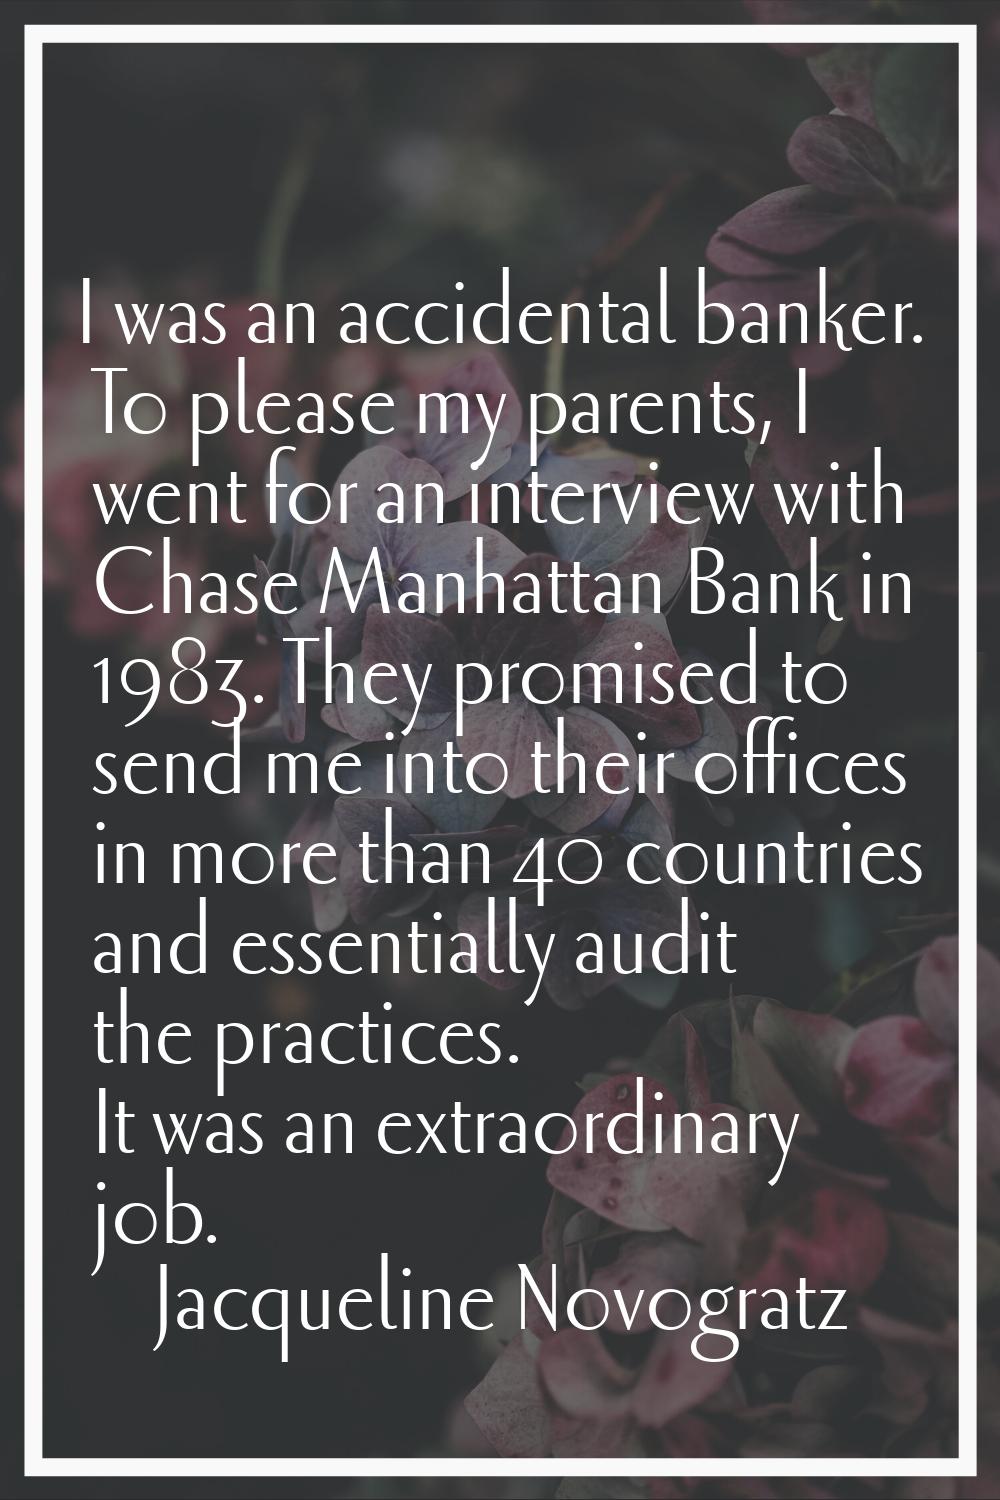 I was an accidental banker. To please my parents, I went for an interview with Chase Manhattan Bank